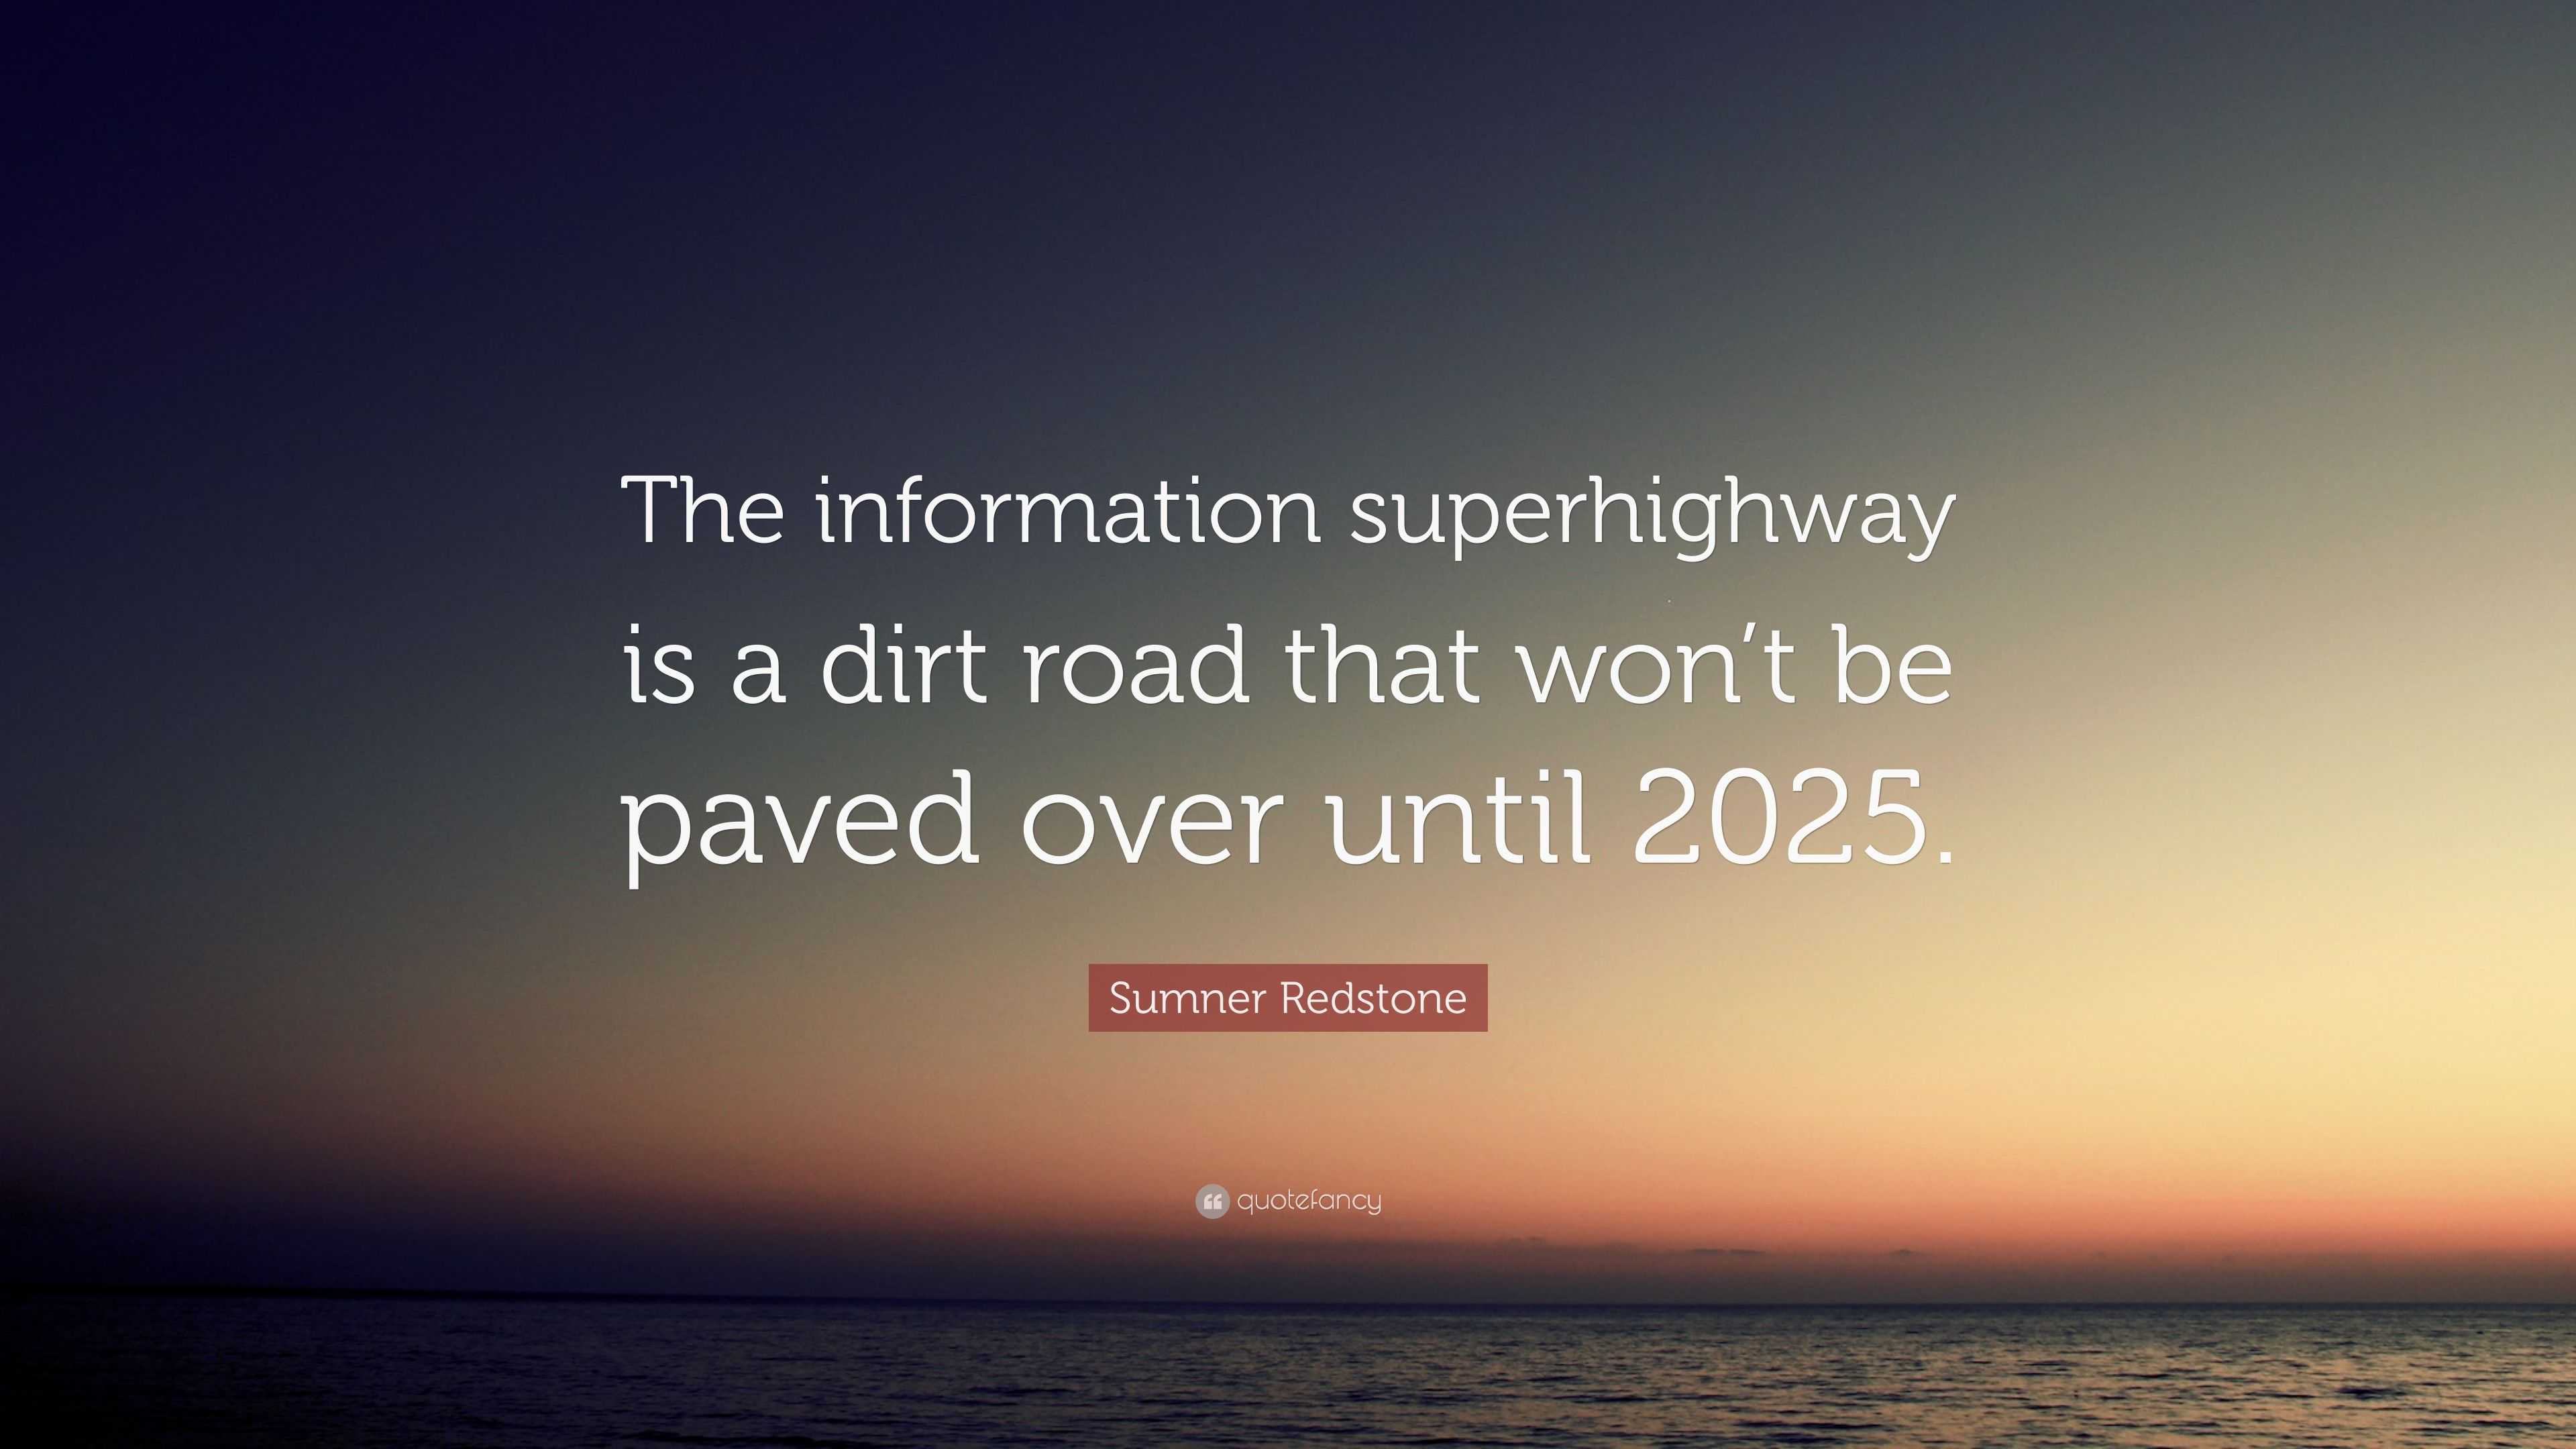 Sumner Redstone Quote “The information superhighway is a dirt road